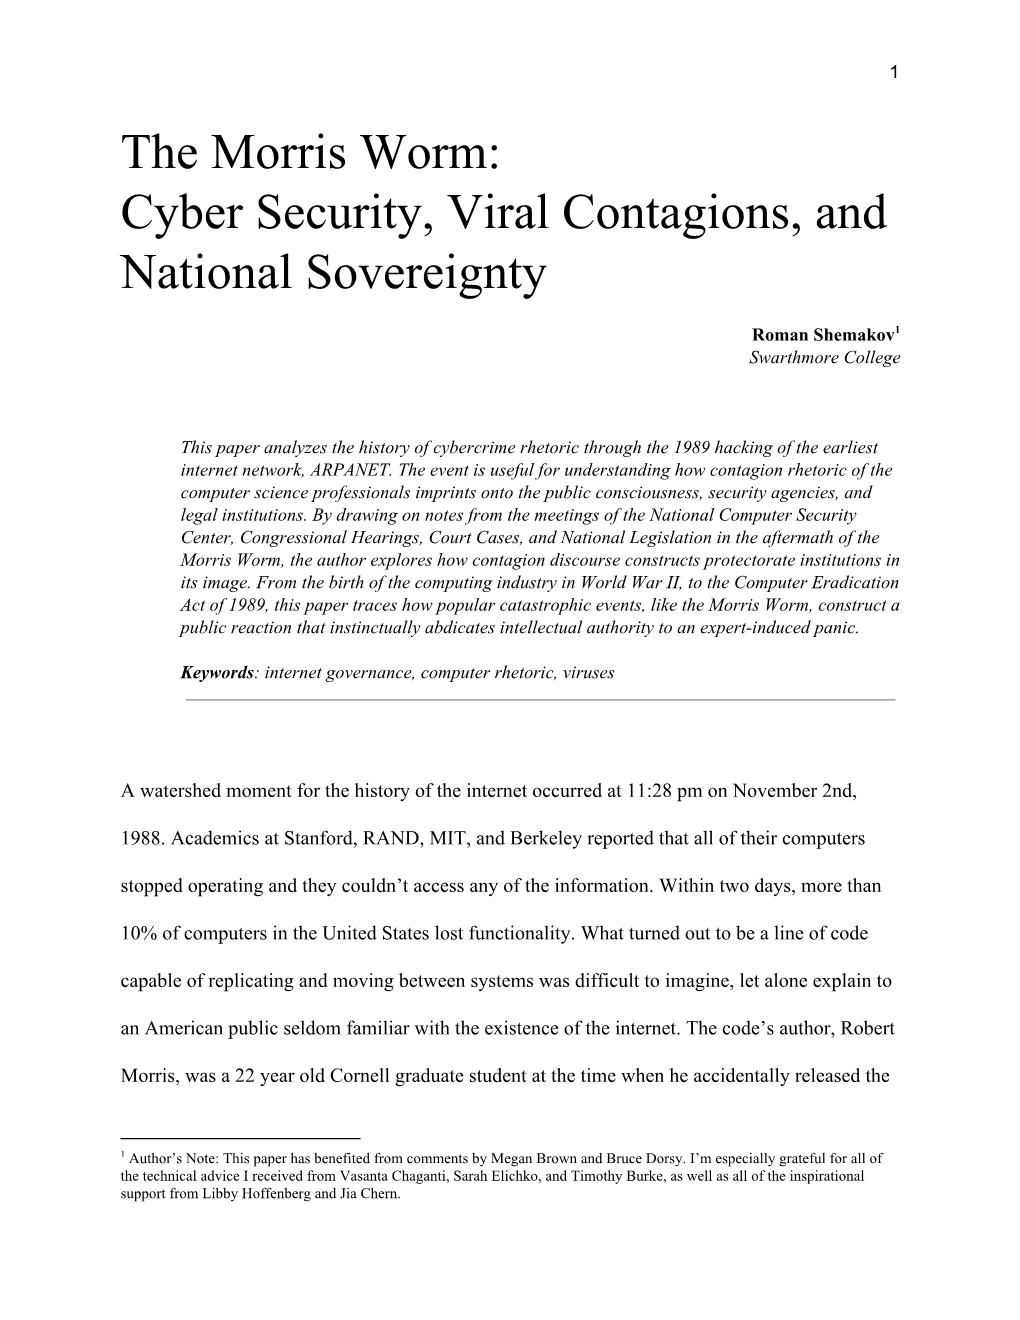 The Morris Worm: Cyber Security, Viral Contagions, and National Sovereignty